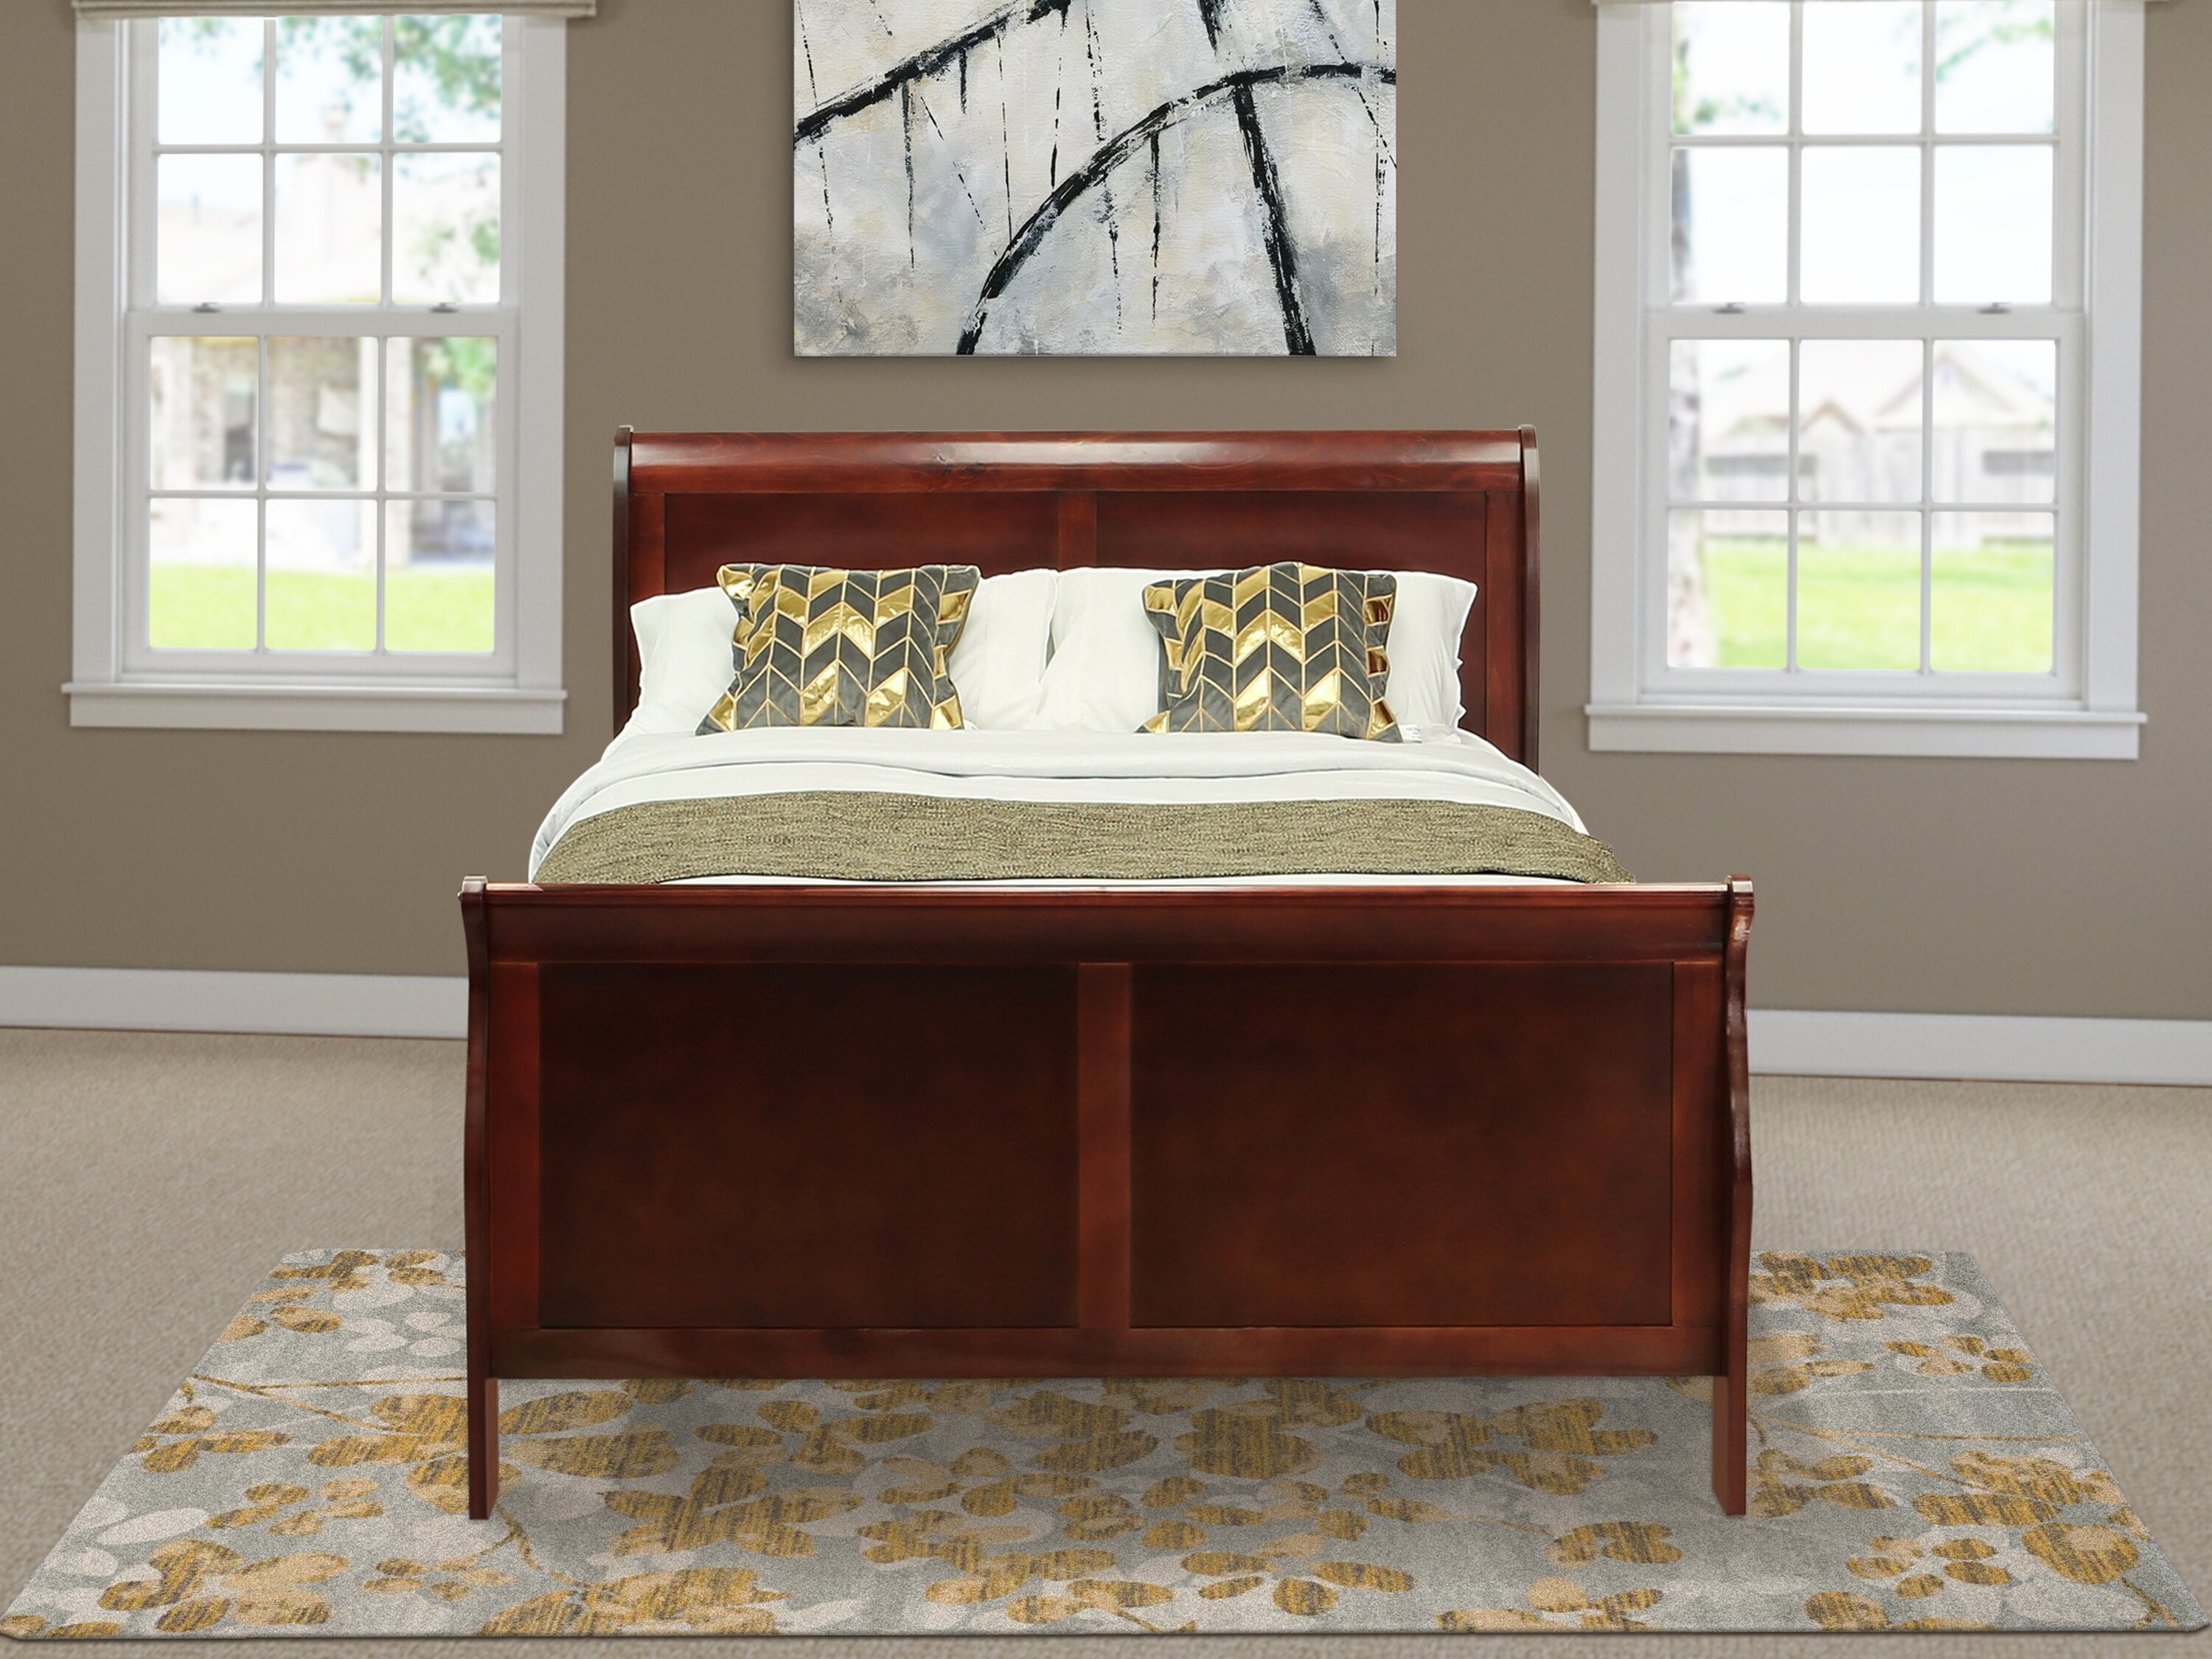 Louis Philippe II Cherry Queen Sleigh Bed - Shop for Affordable